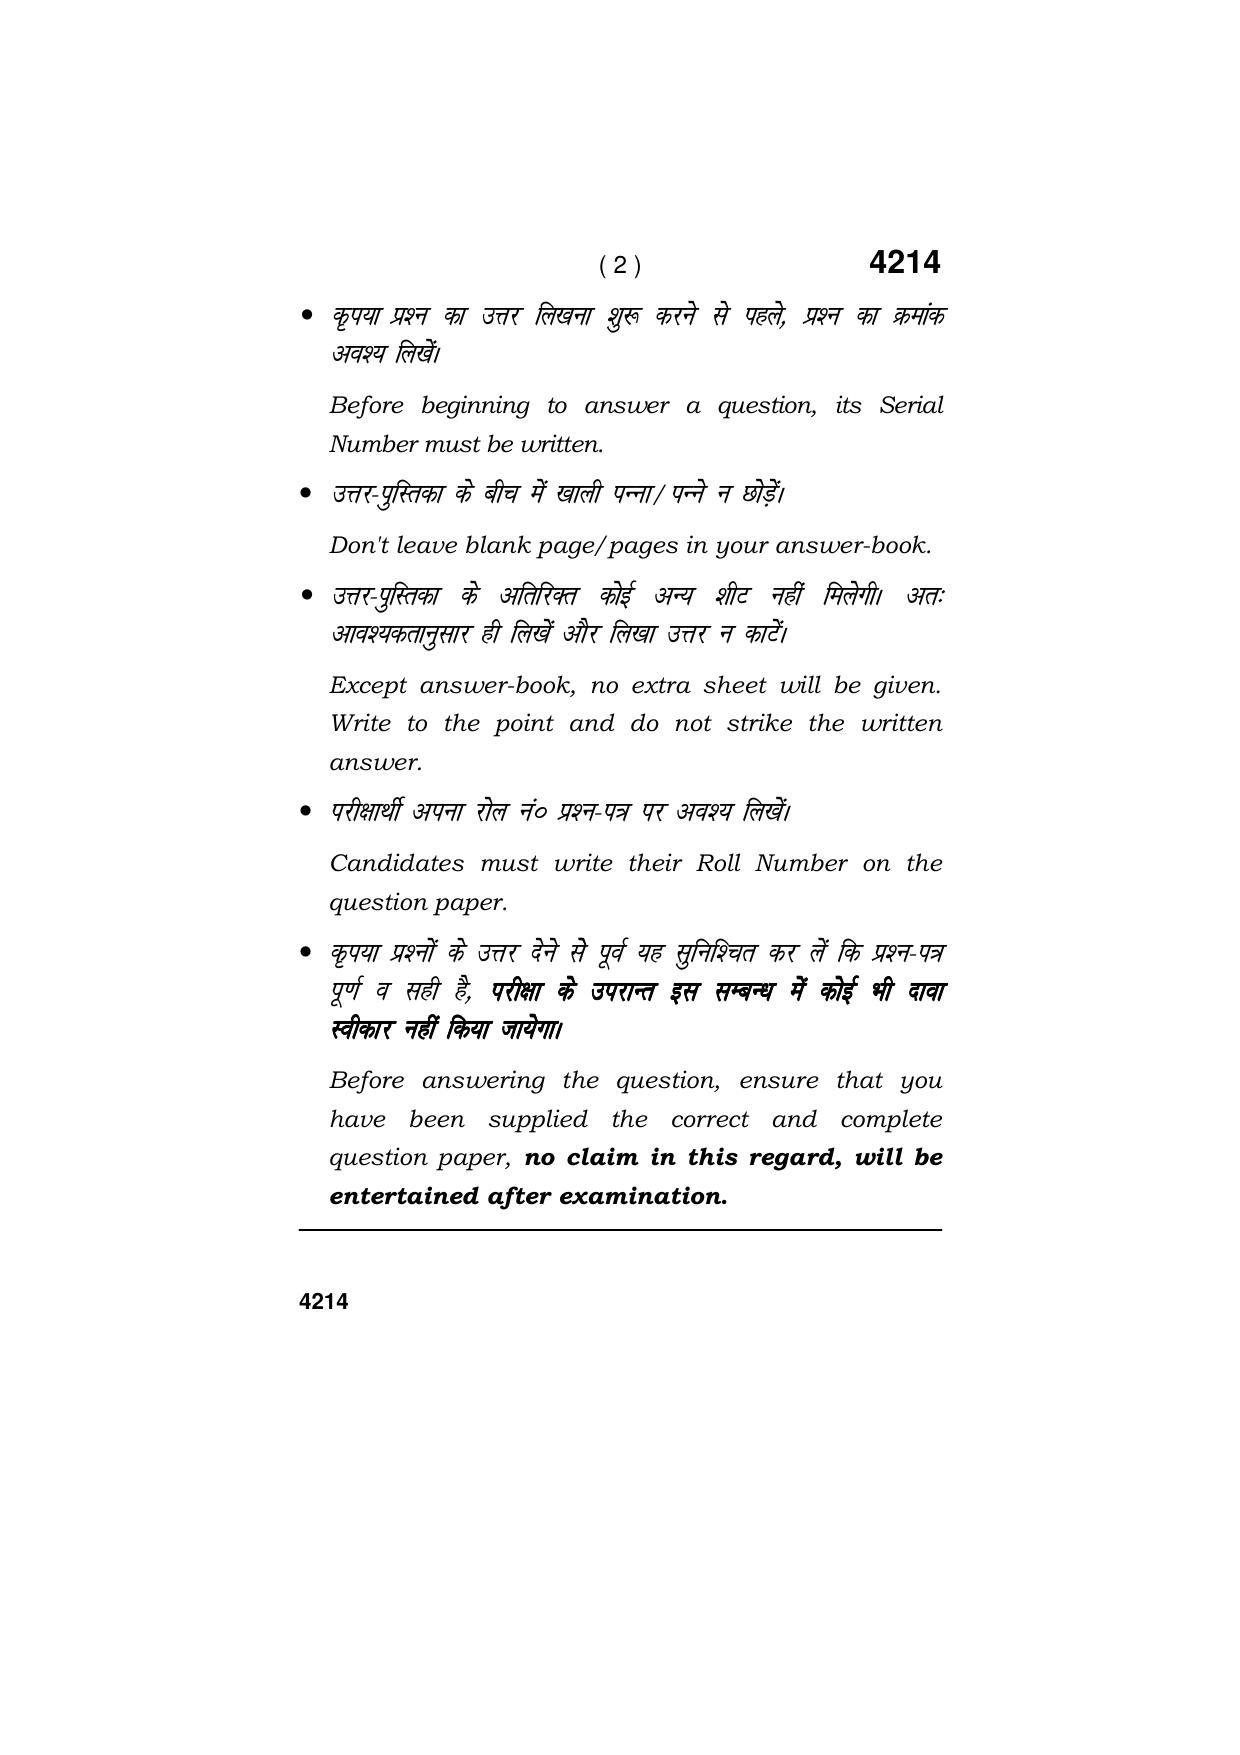 Haryana Board HBSE Class 10 Animal Husbandry 2019 Question Paper - Page 2